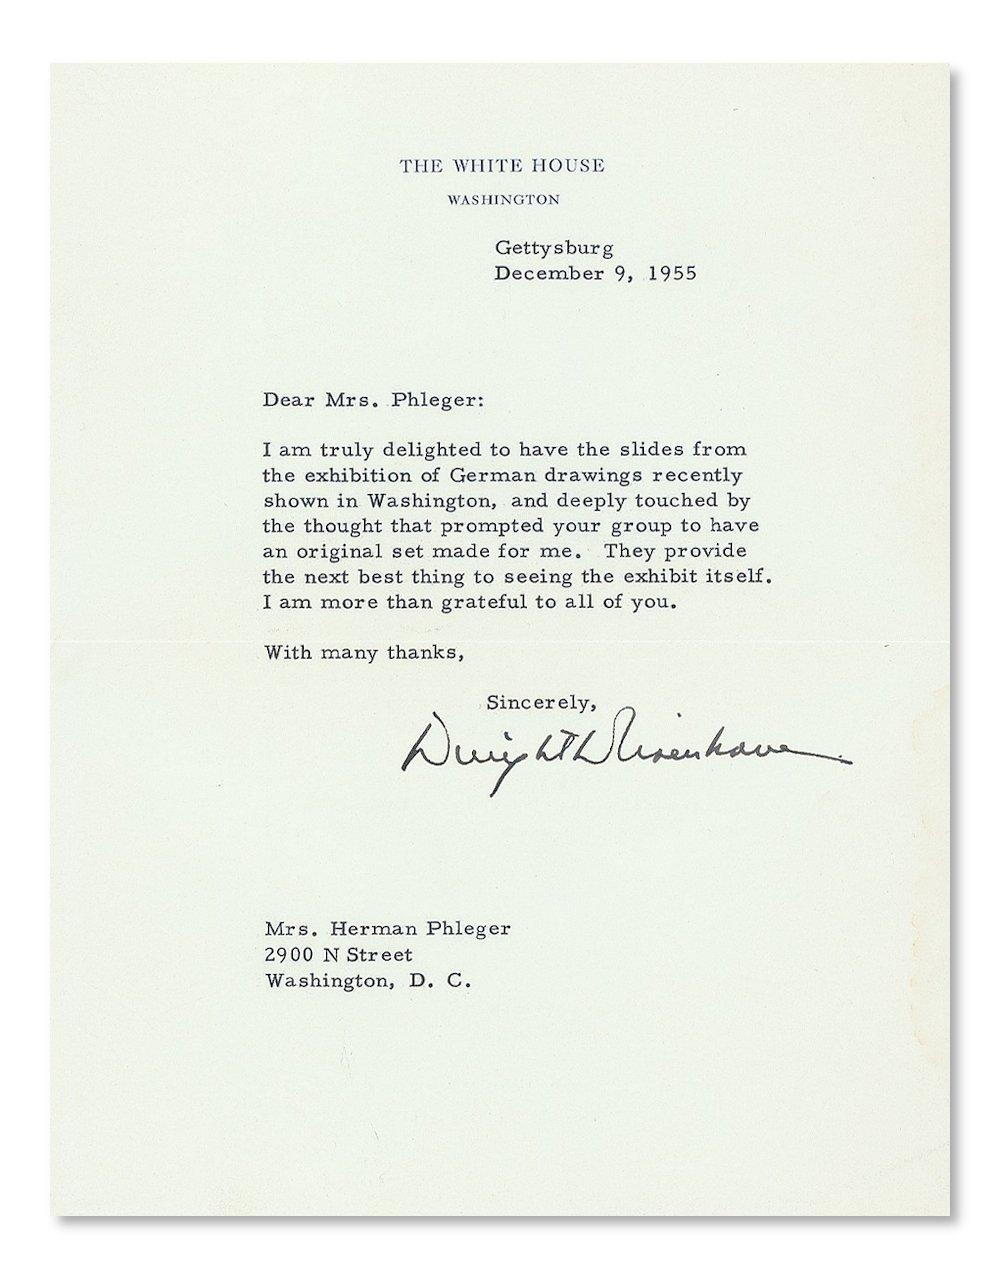 A pair of typed, signed letters from US President Dwight D. Eisenhower (1890 – 1969) and the First Lady Mamie Eisenhower (1896 – 1979).

The first is a typed letter on White House stationary, dated December 9, 1955 and addressed from the